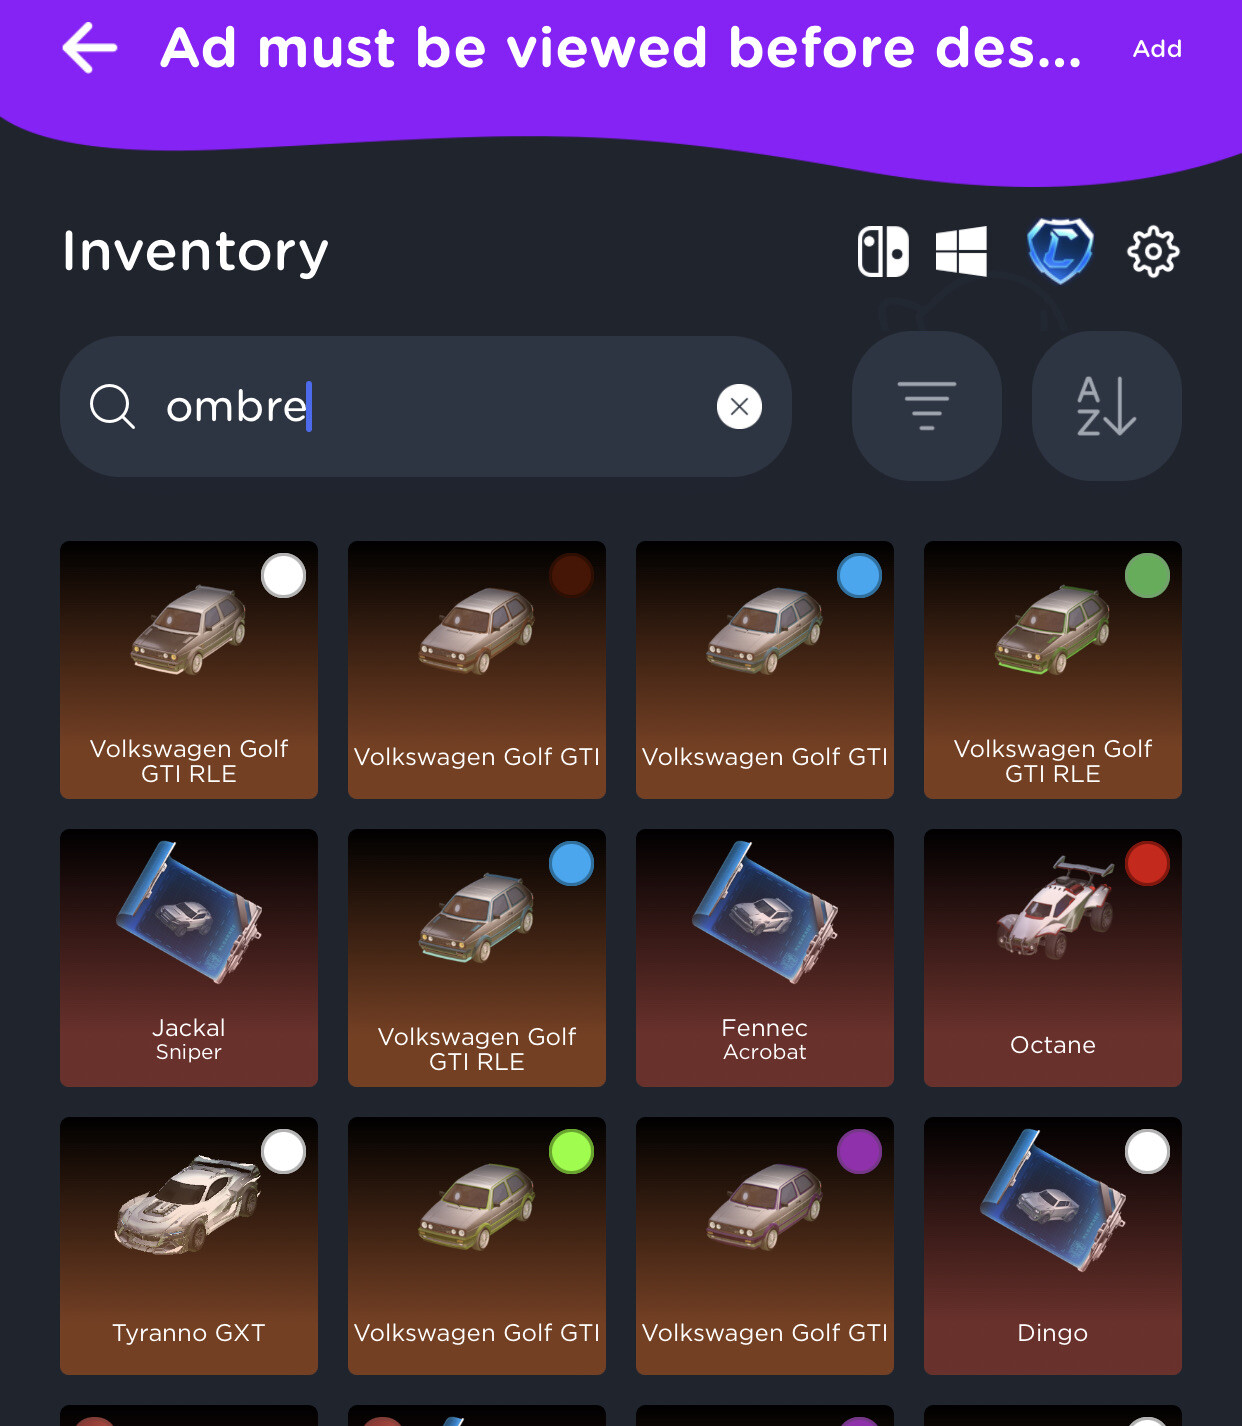 Inventory search is confused